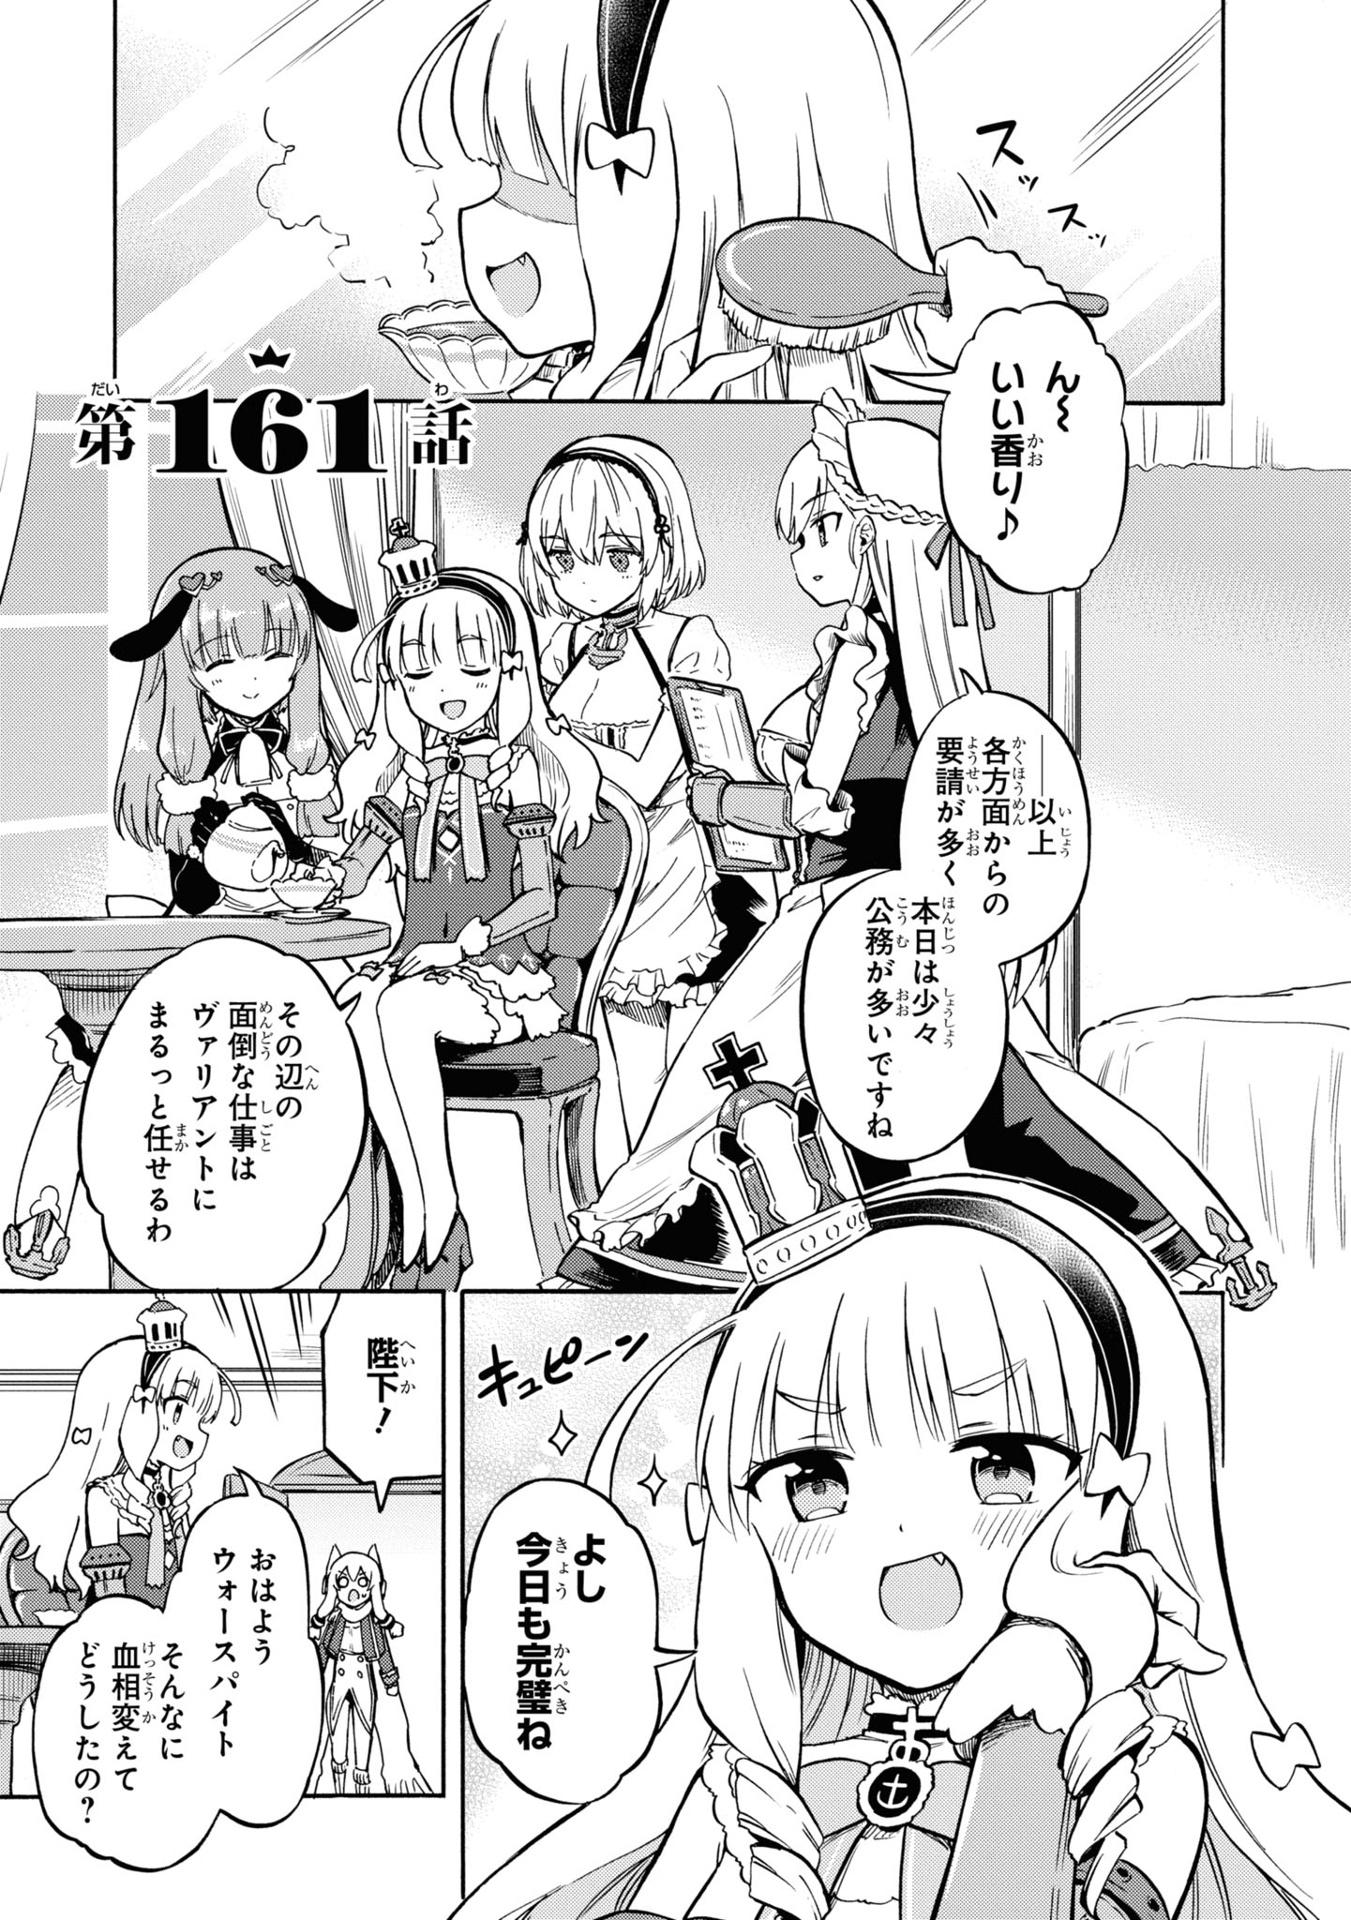 Azur Lane Queen's Orders 6 (Japanese Edition)